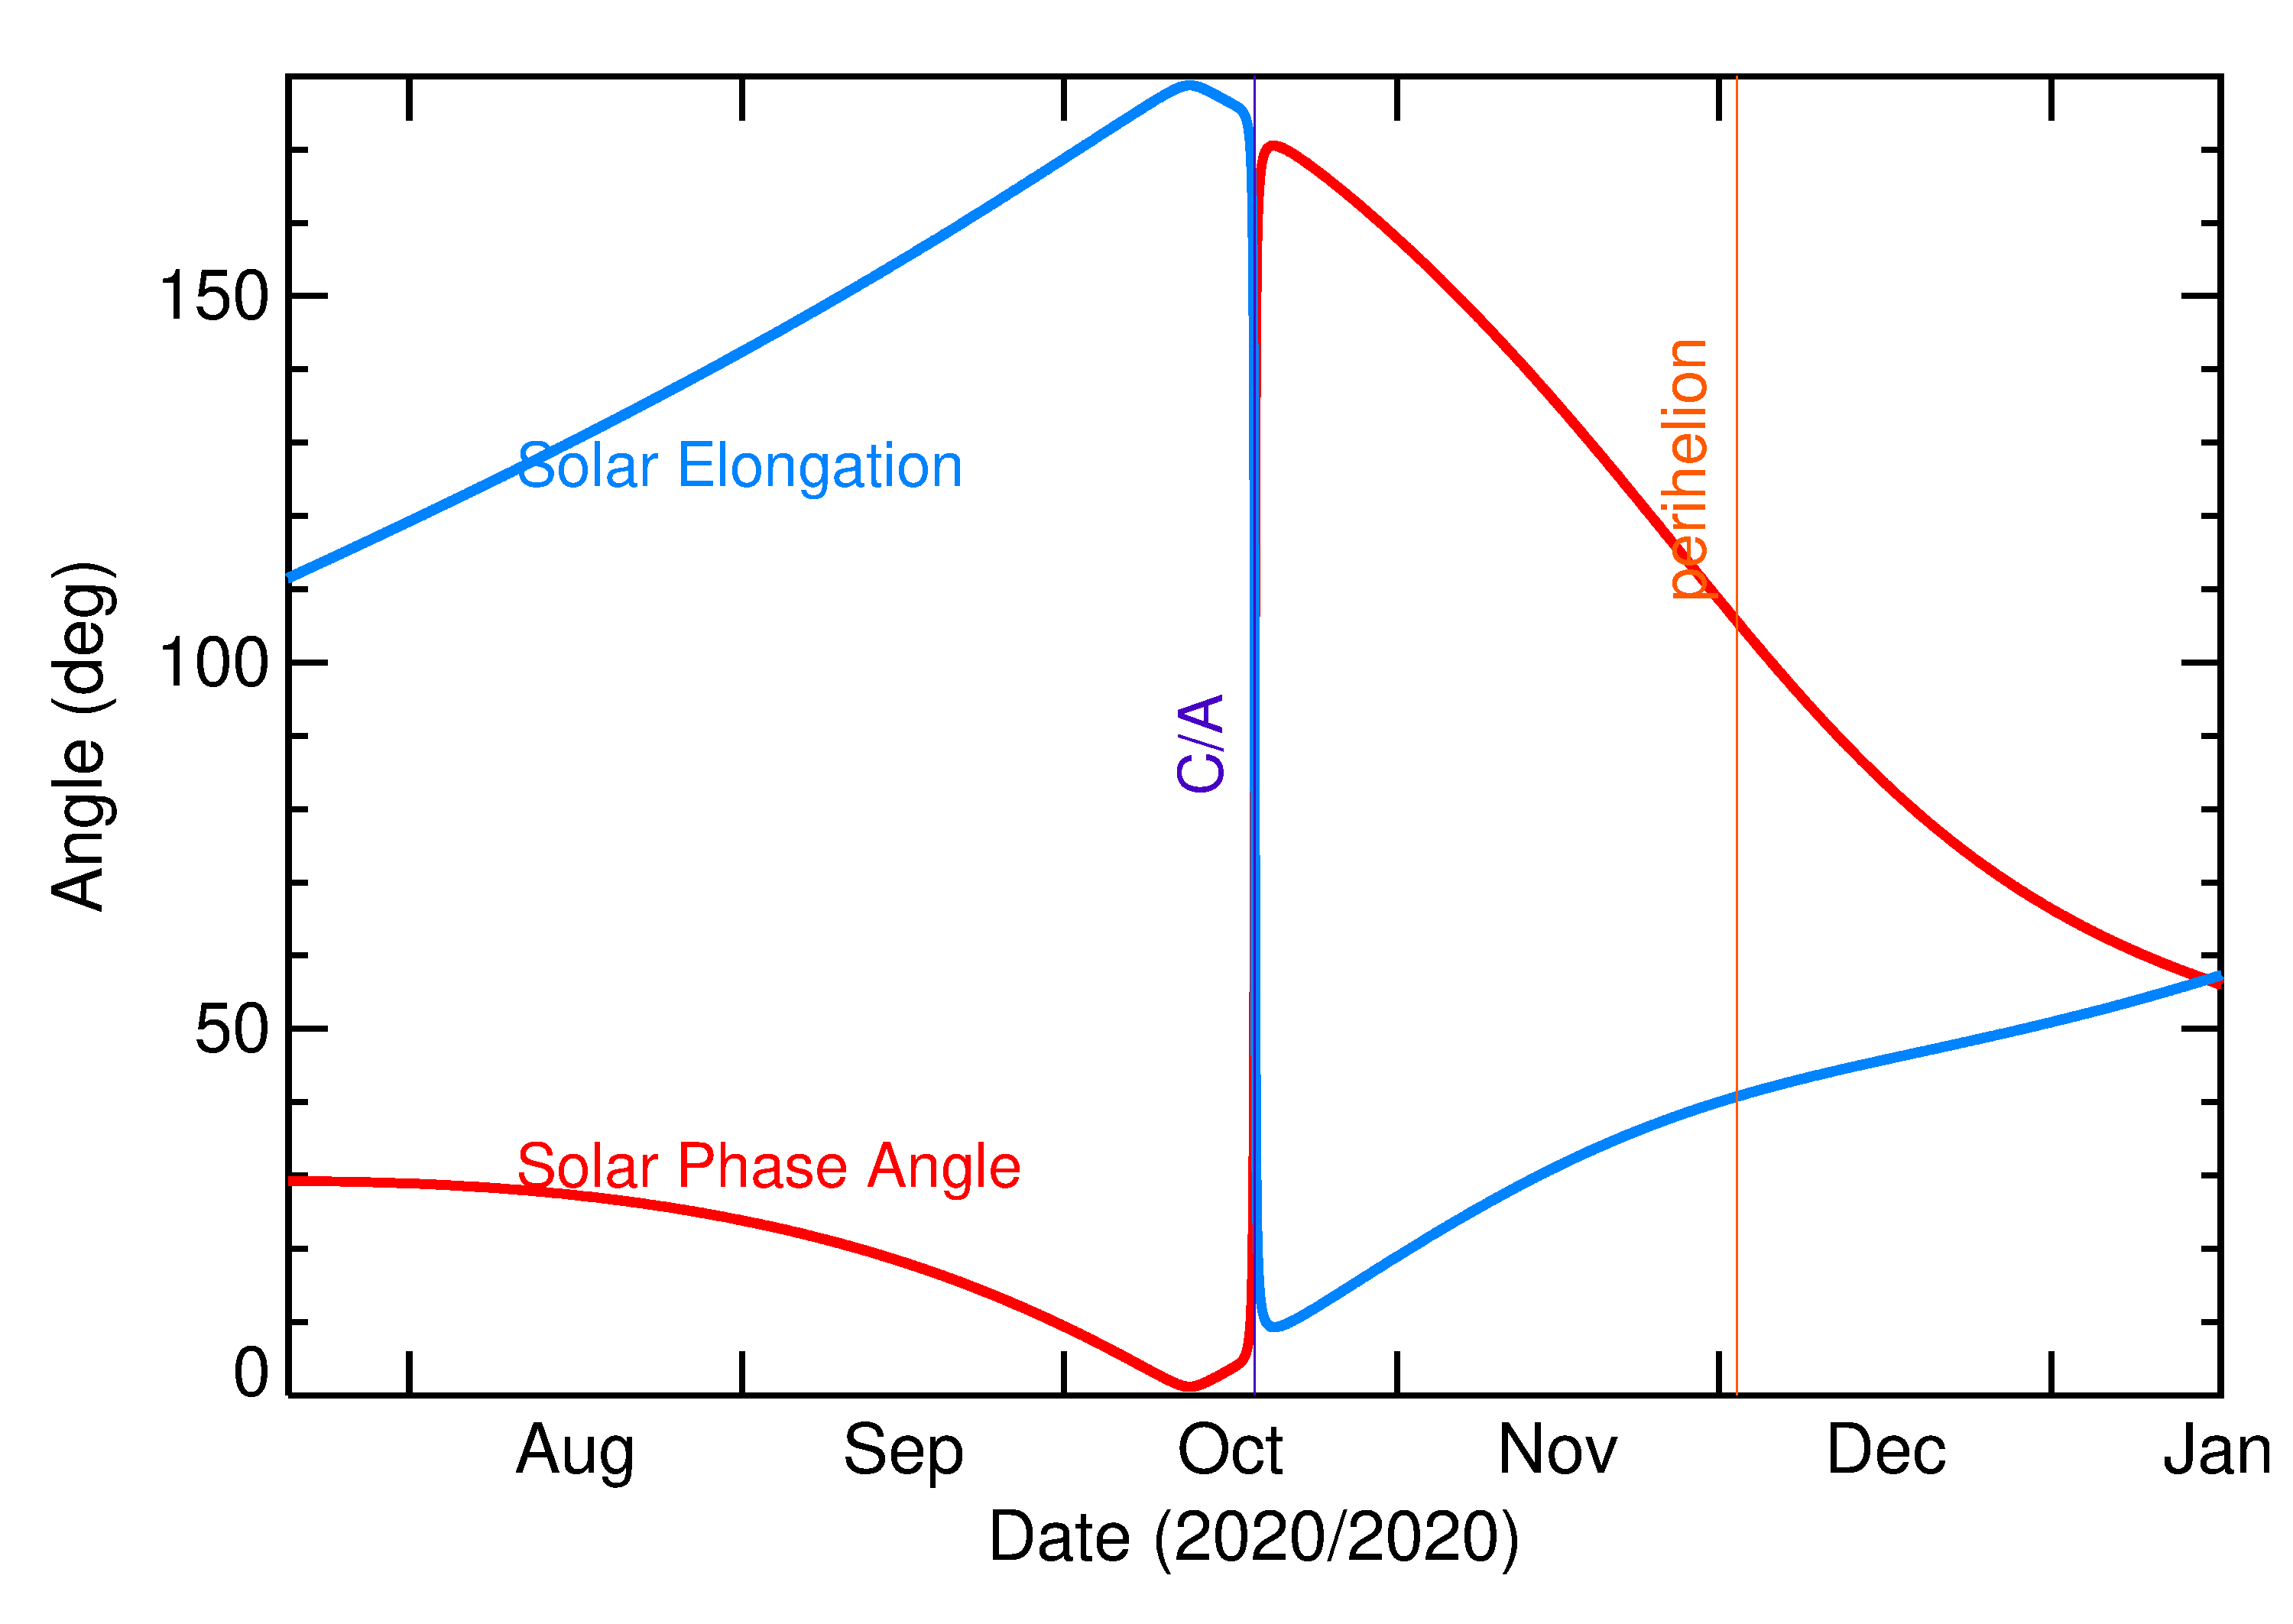 Solar Elongation and Solar Phase Angle of 2020 TG6 in the months around closest approach